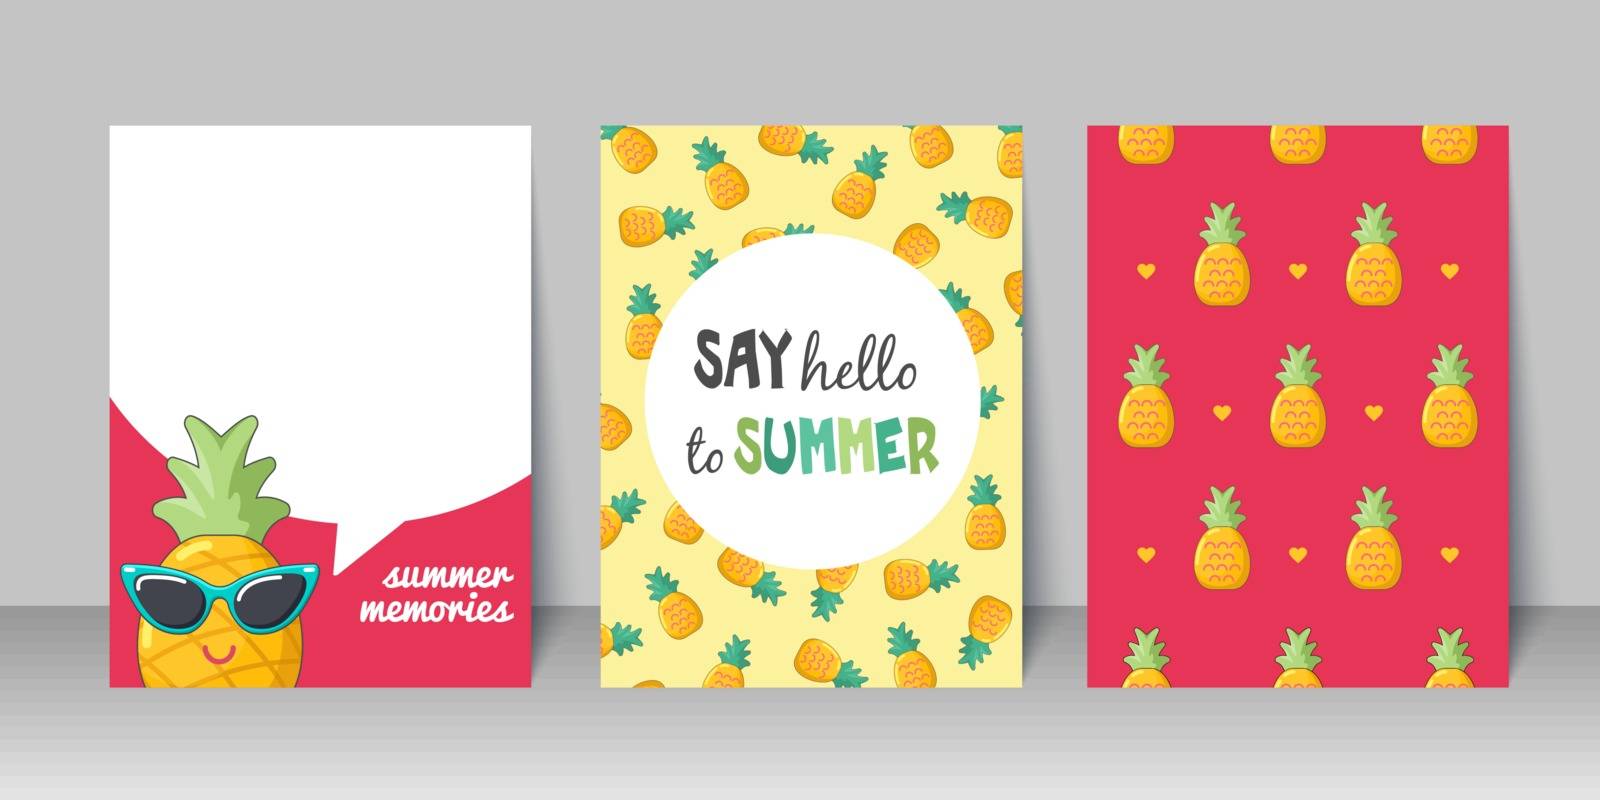 Summer poster card. Say hello to summer by nosik